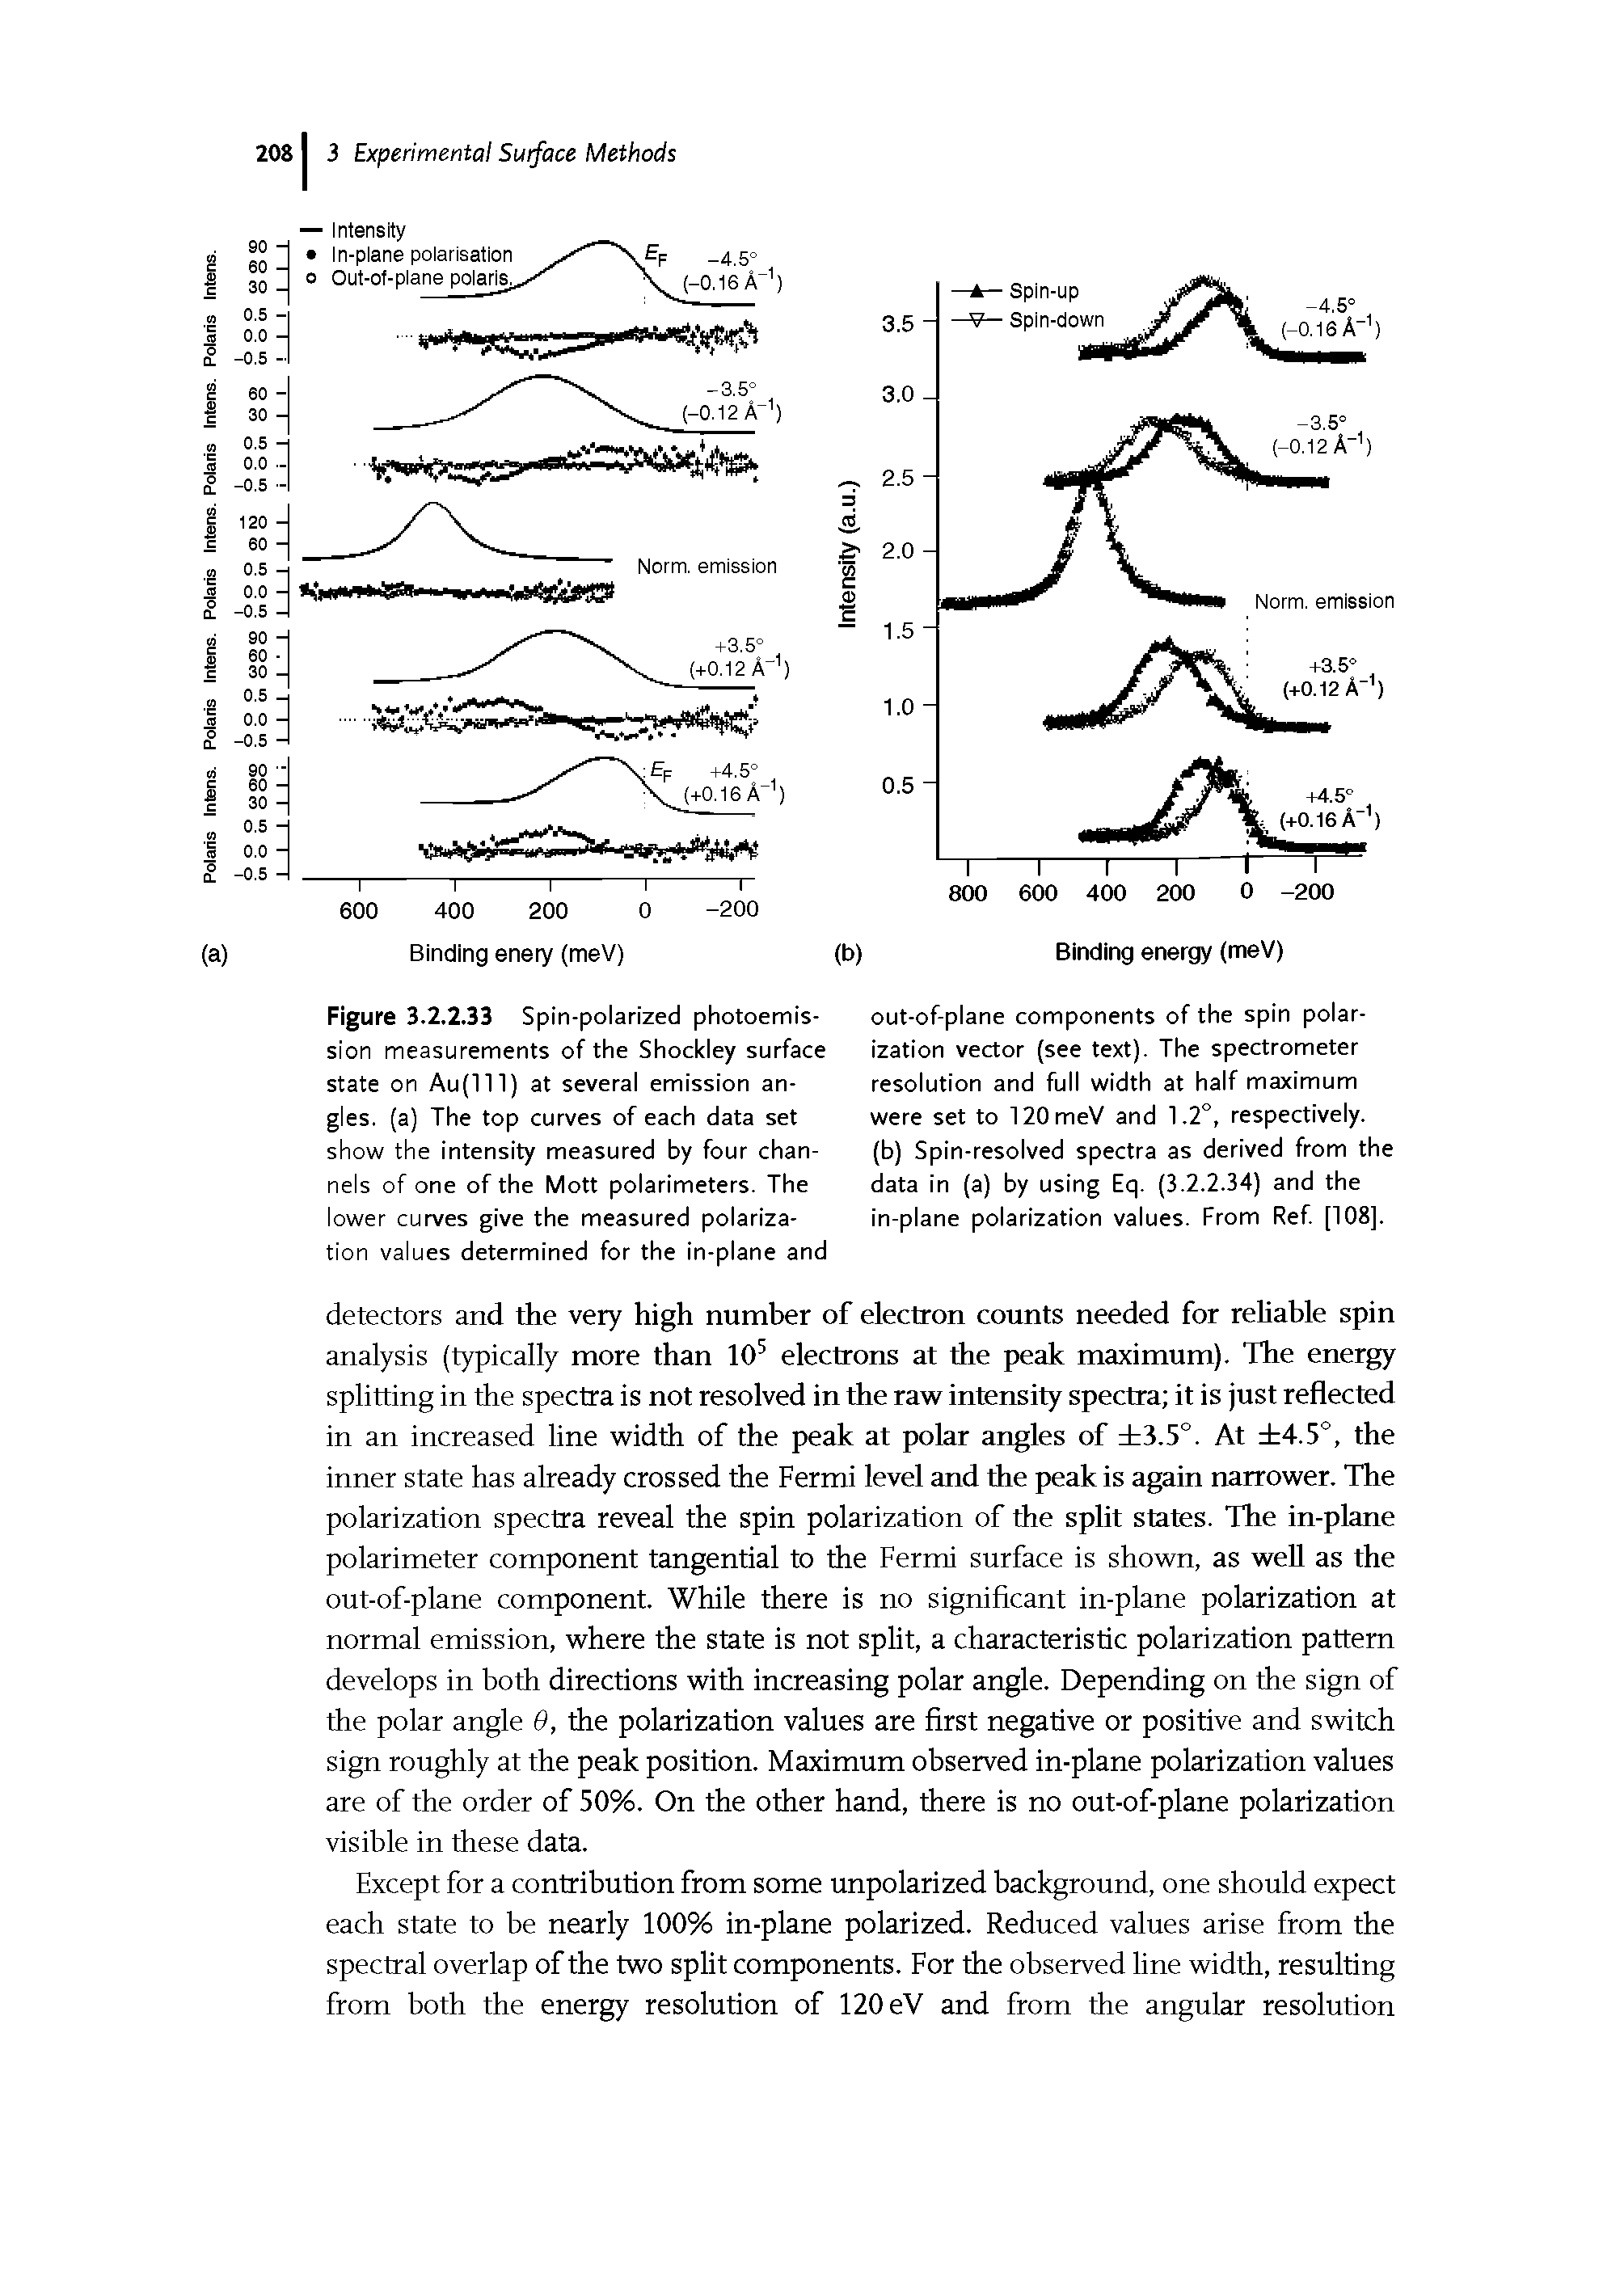 Figure 3.2.2.33 Spin-polarized photoemission measurements of the Shockley surface state on Au(lll) at several emission angles. (a) The top curves of each data set show the intensity measured by four channels of one of the Mott polarimeters. The lower curves give the measured polarization values determined for the in-piane and...